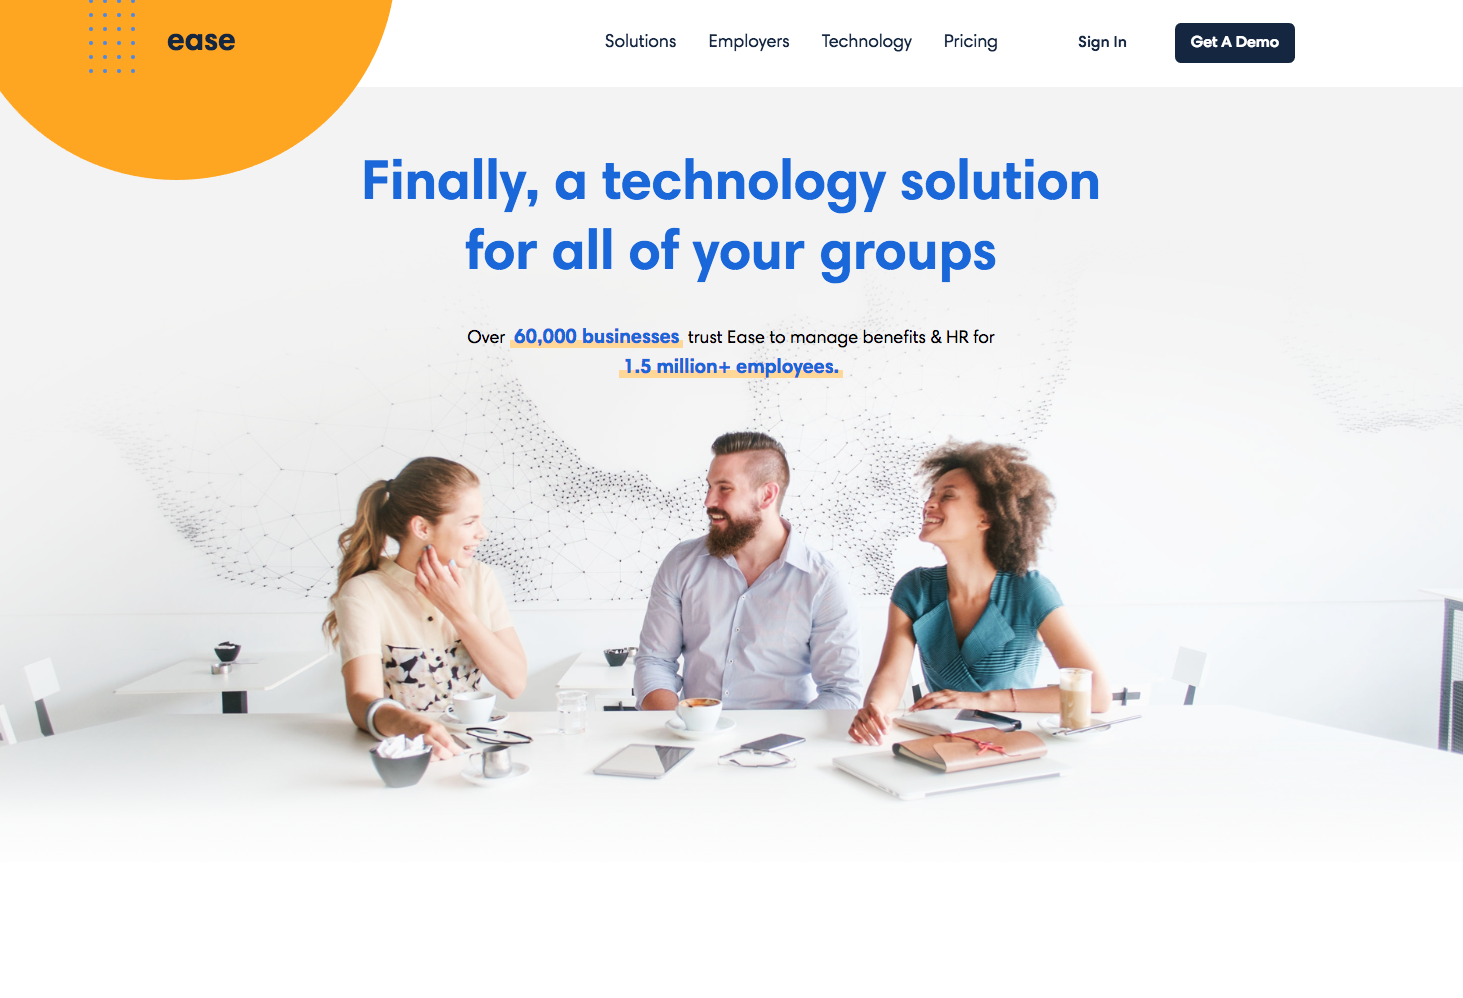 EaseCentral Announces $19 Million in Series B Funding, Rebrands to “Ease” with Enhanced Capabilities